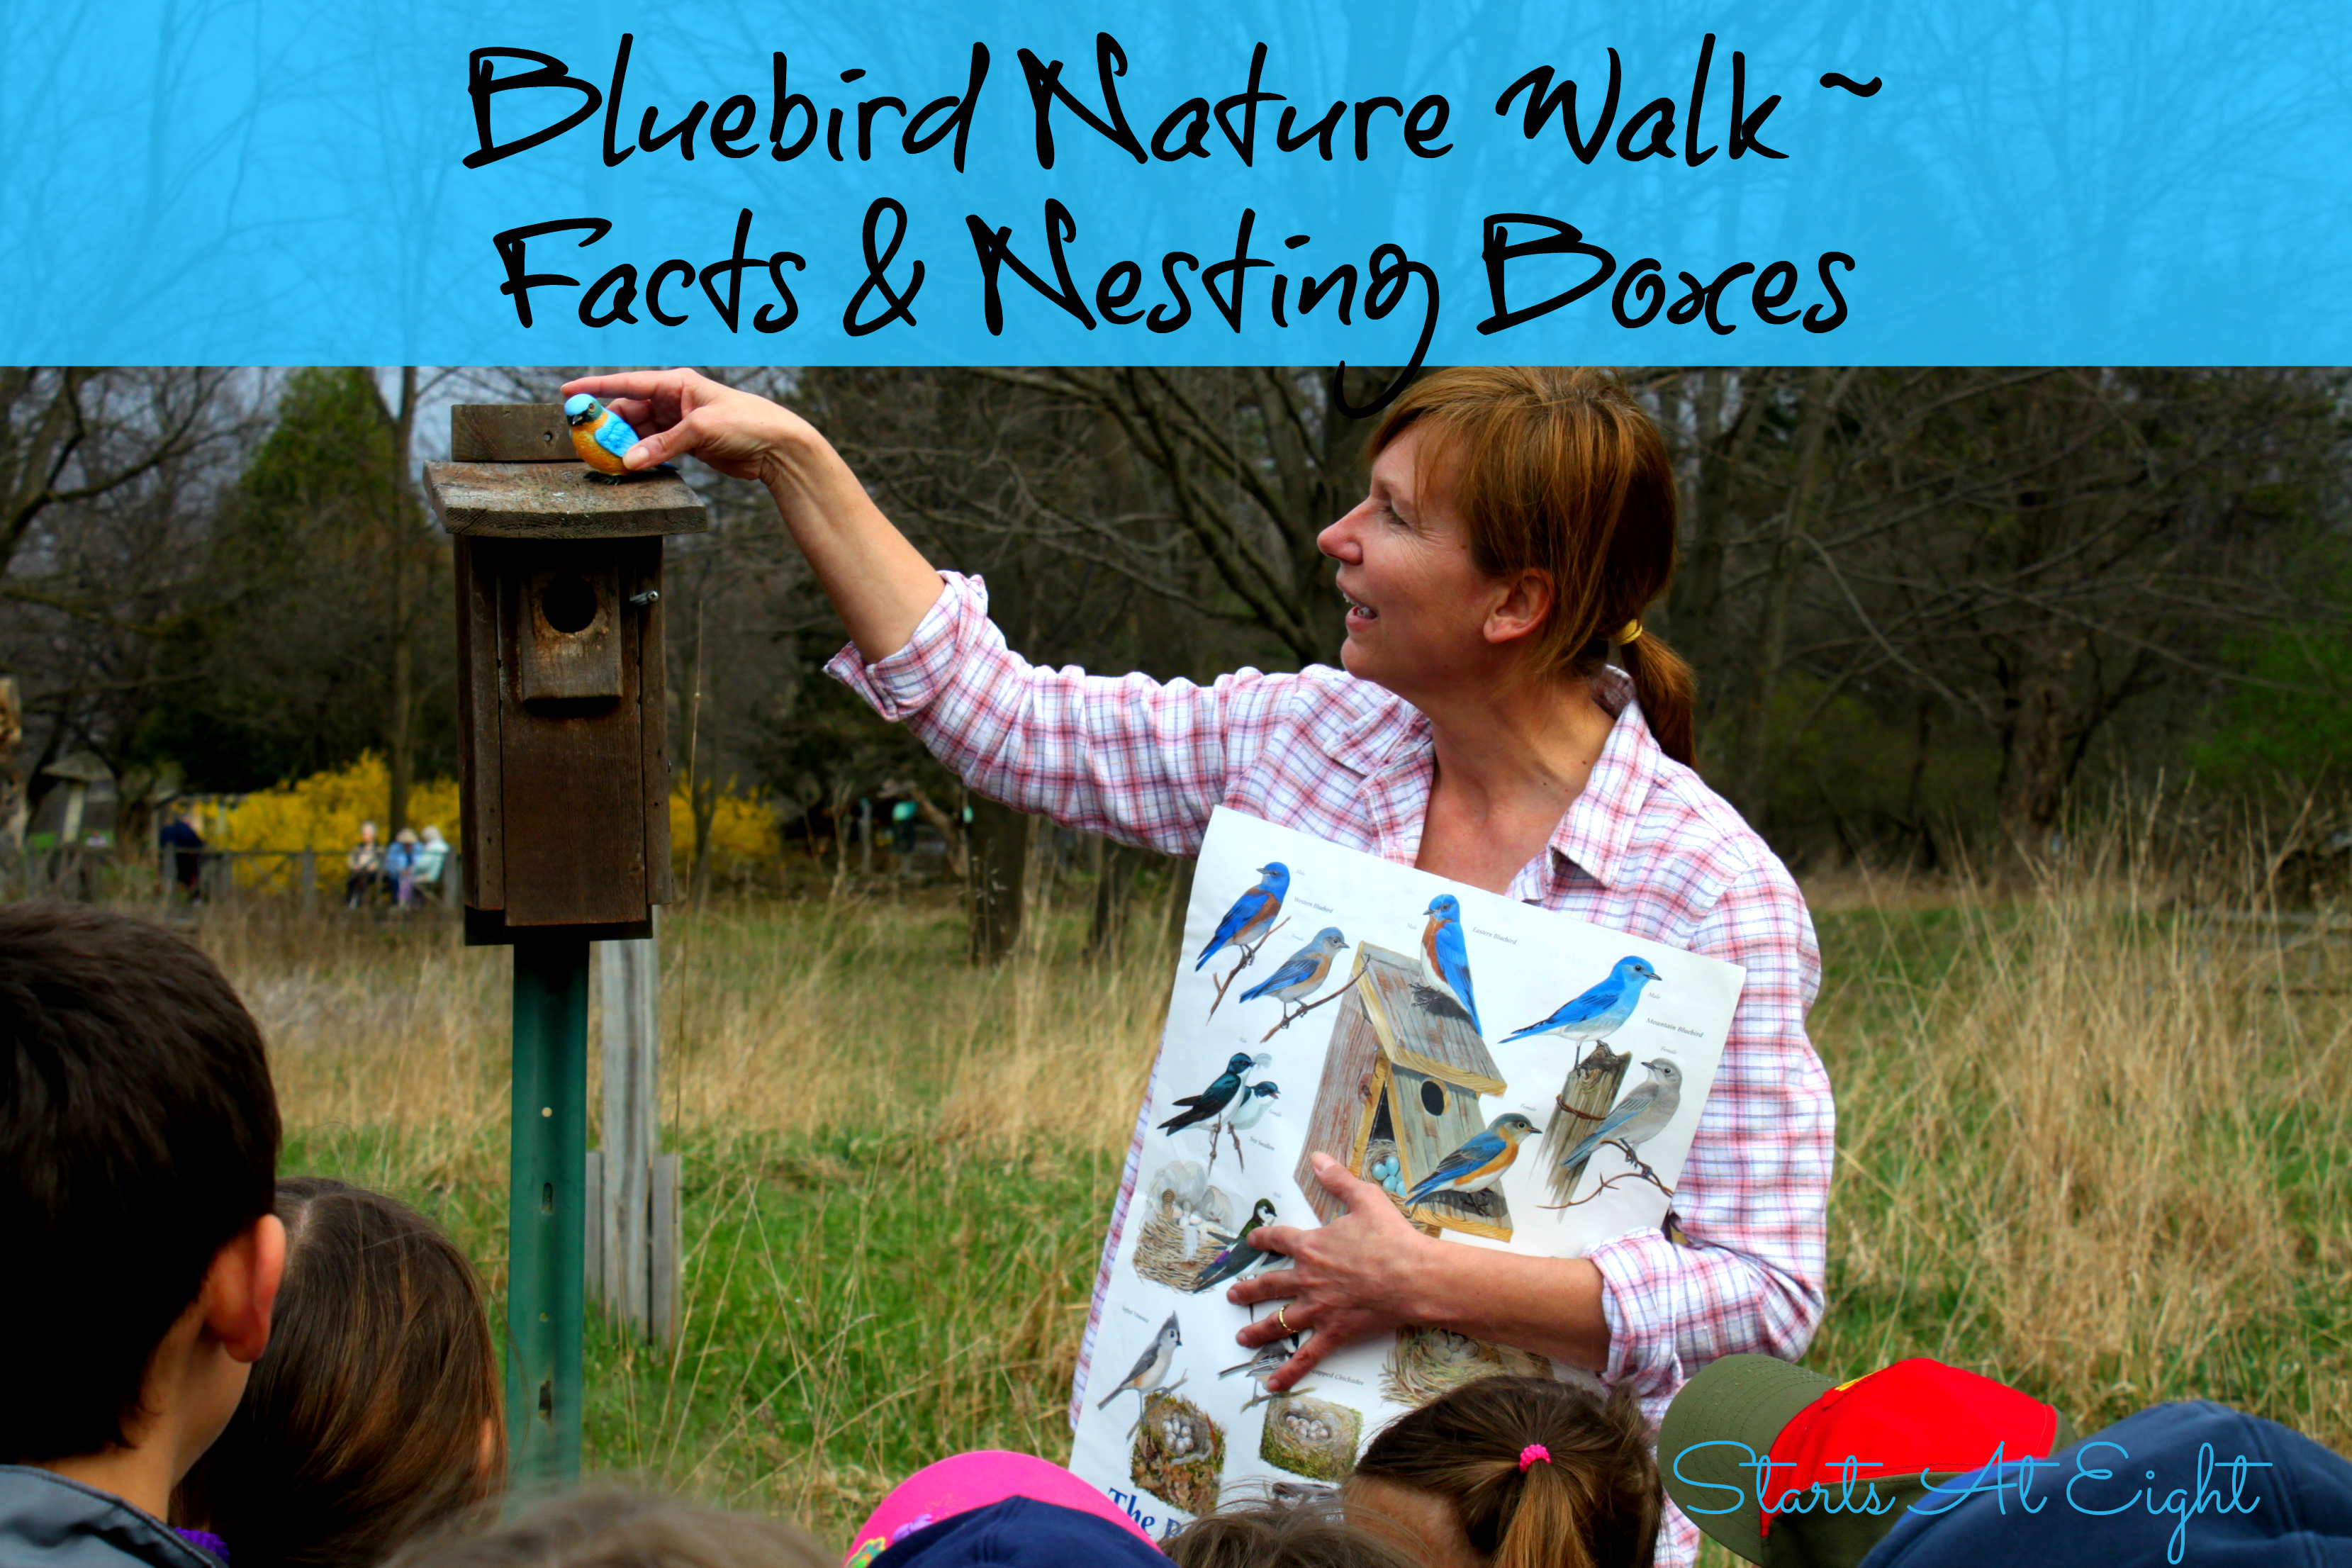 Bluebird Nature Walk ~ Facts & Nesting Boxes from Starts At Eight